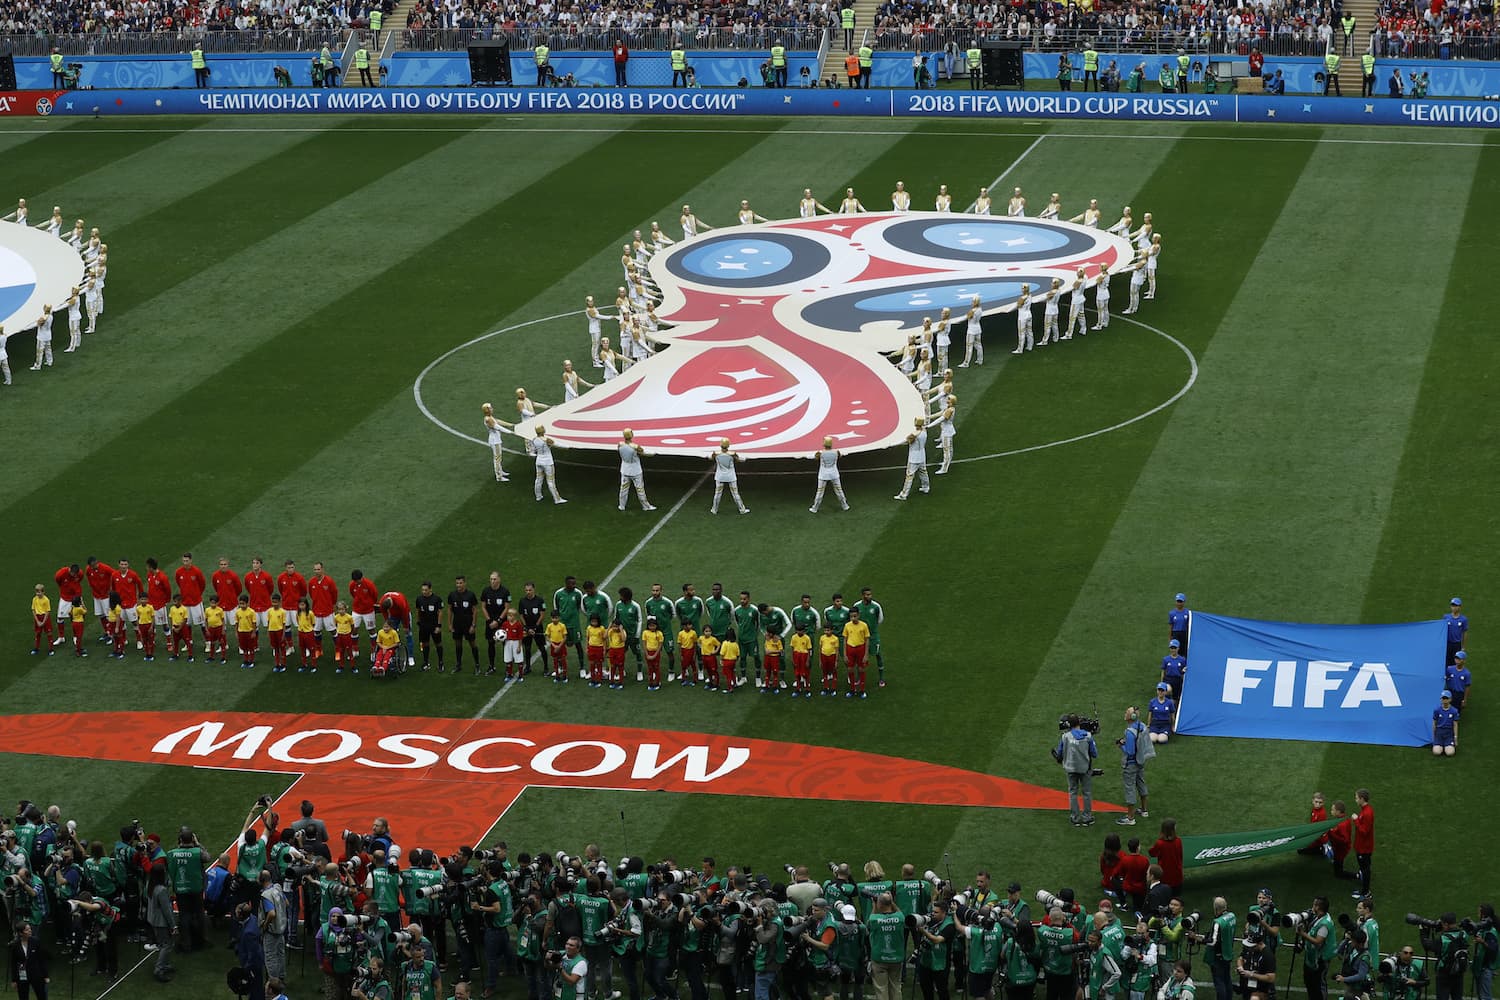 The teams of Russia and Saudi Arabia line up prior to their group A march which opens the 2018 soccer World Cup at the Luzhniki stadium in Moscow, Russia, Thursday, June 14, 2018. (Victor Caivano/AP)